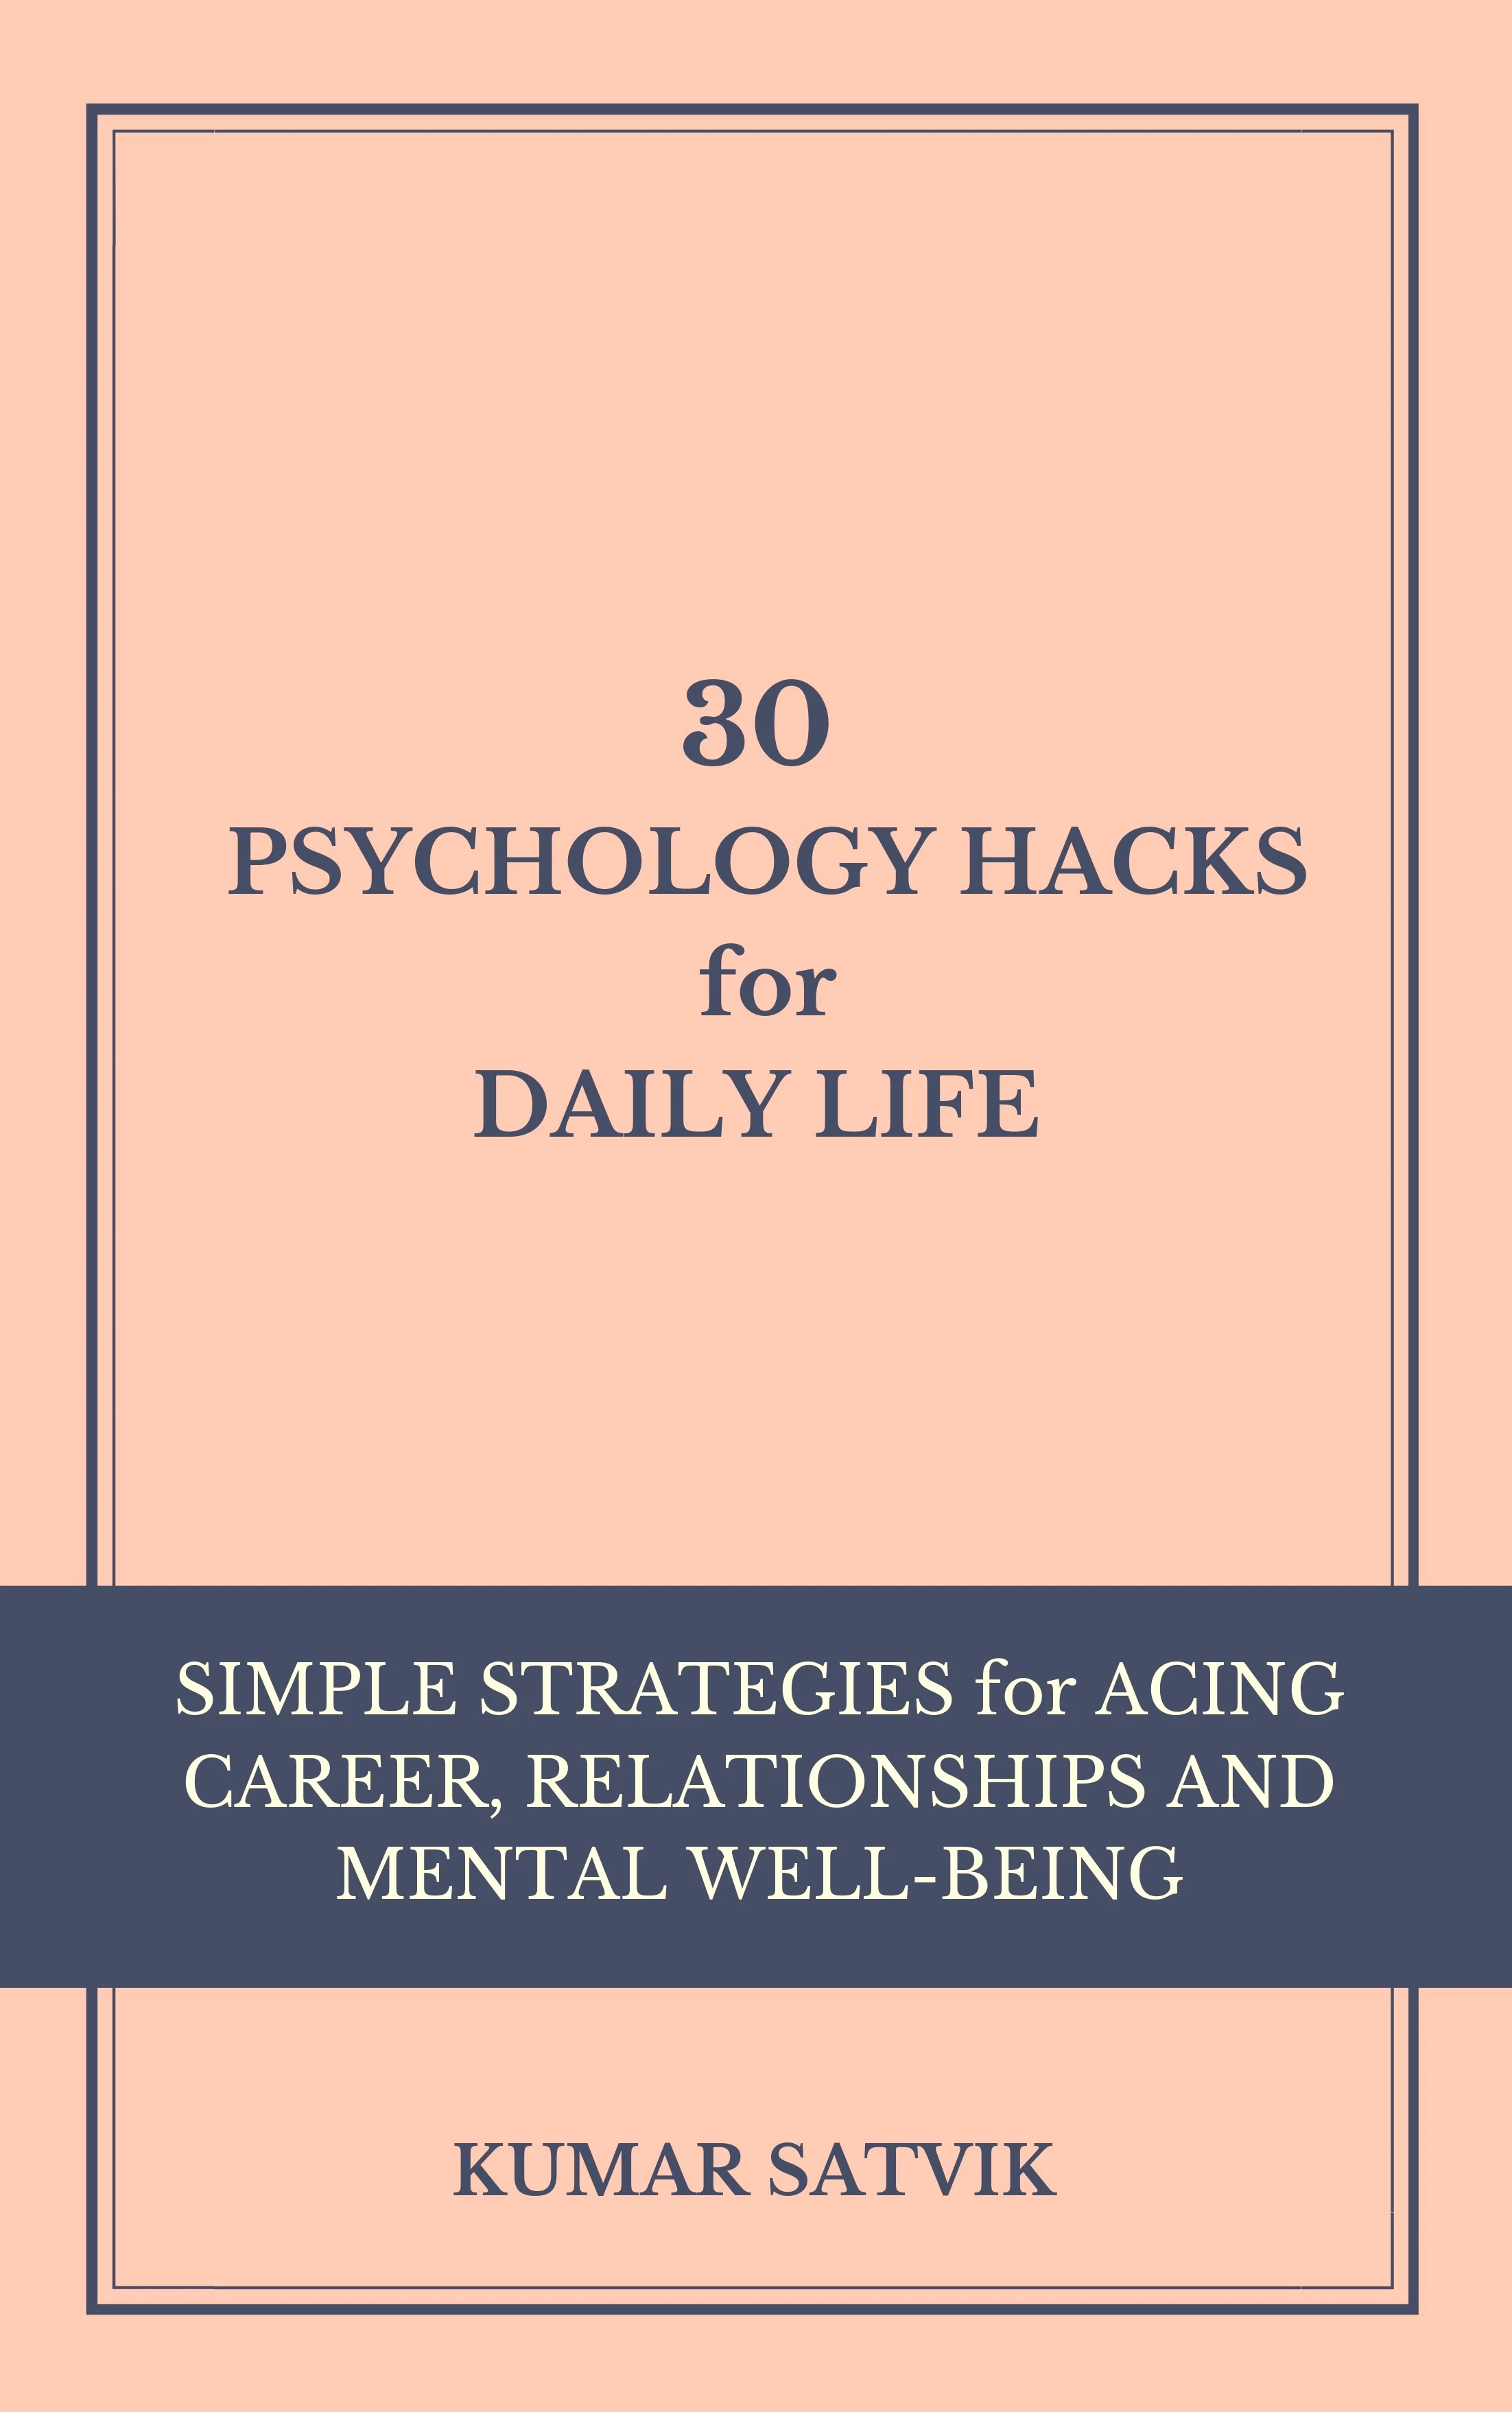 30 Psychology Hacks for Daily Life